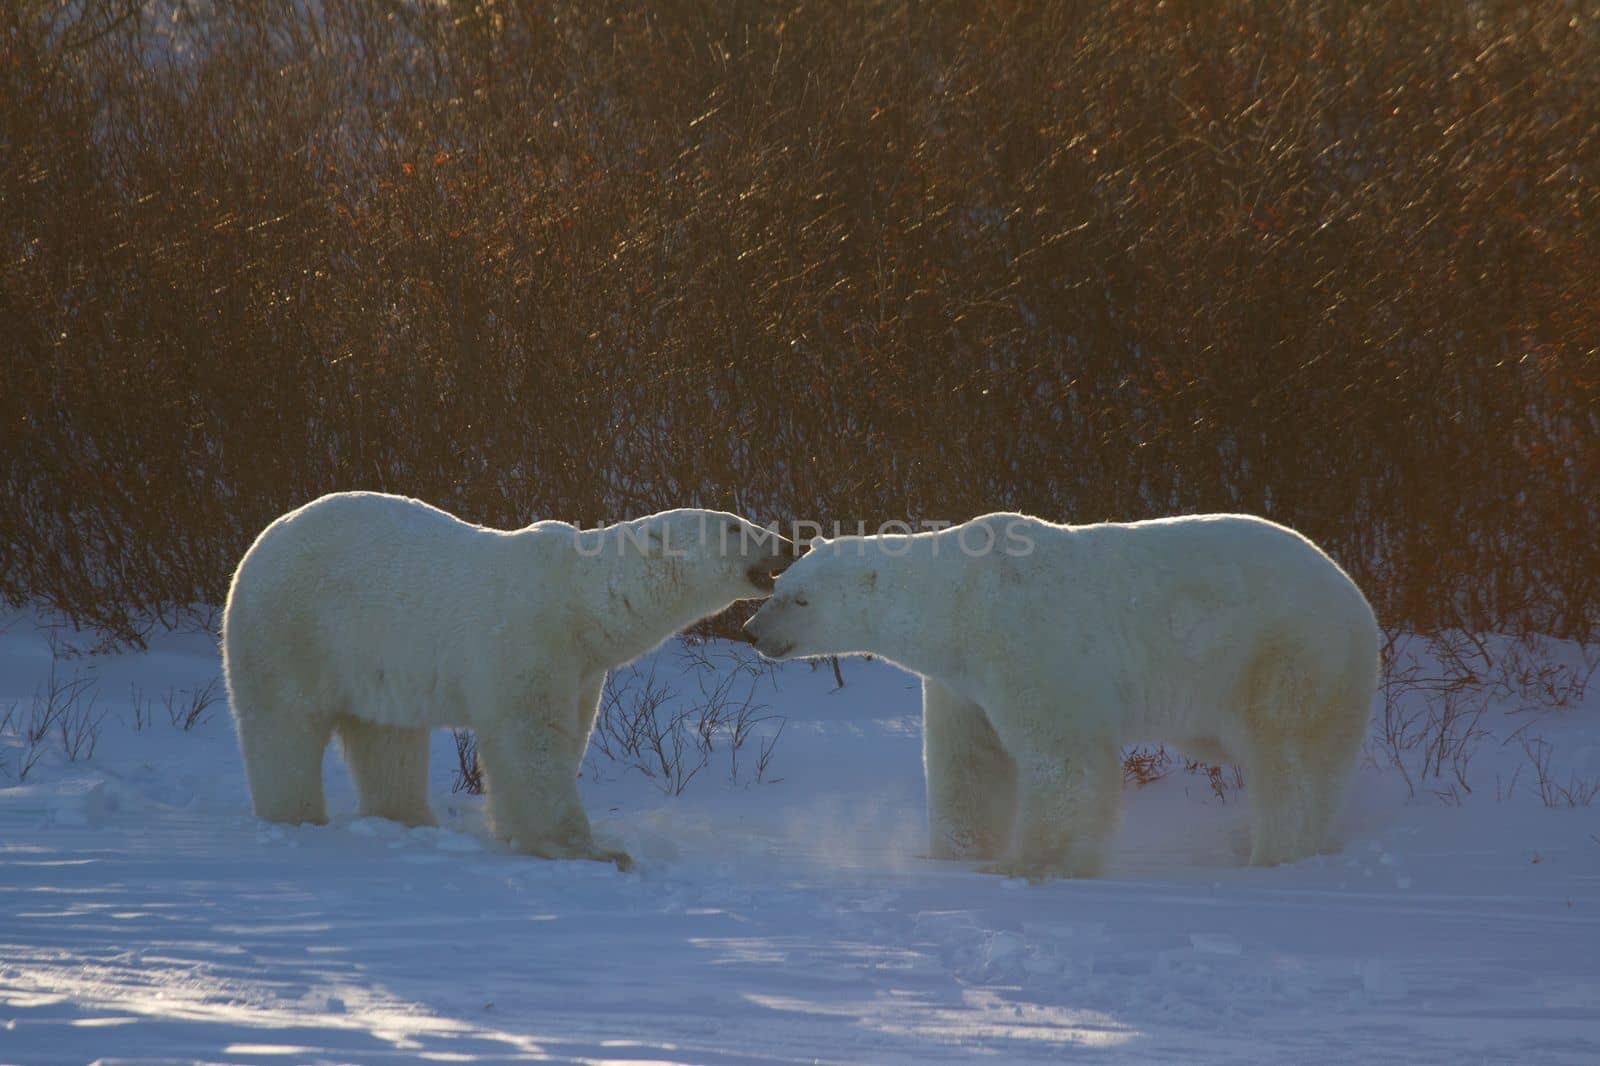 Two polar bears sniffing each other with snow on the ground and willows in the background, near Churchill, Manitoba Canada